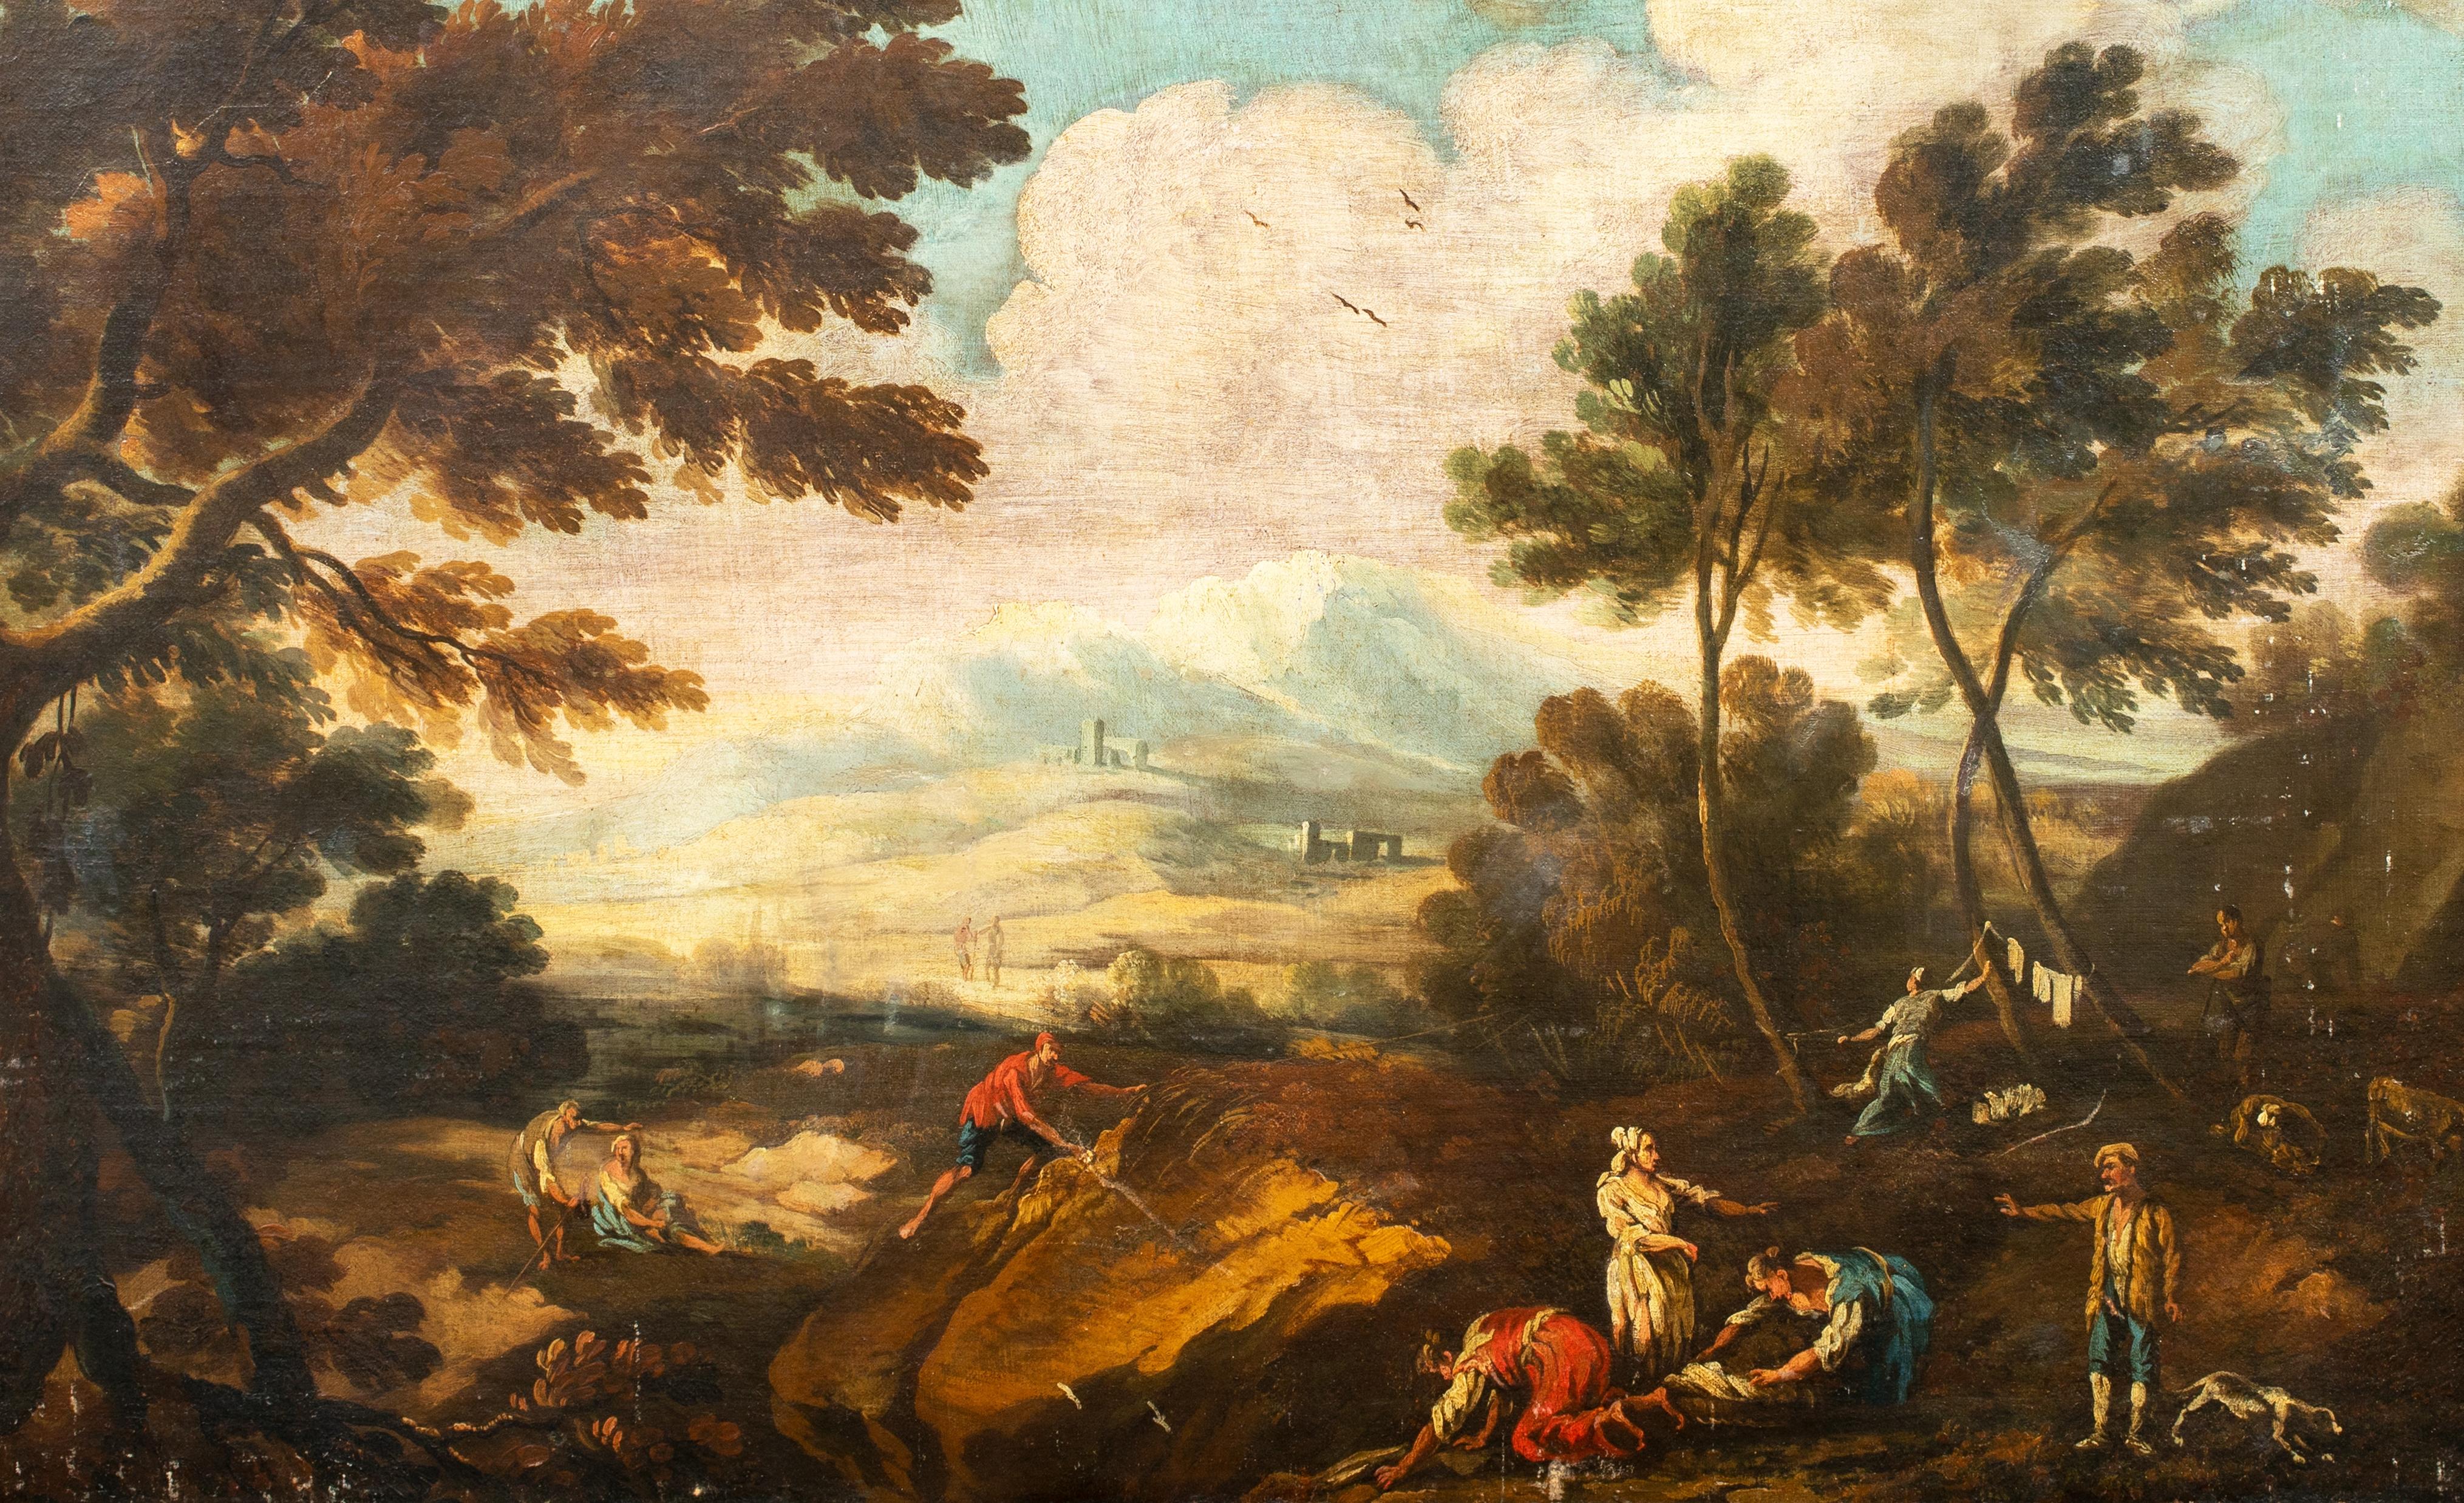 Landscape, 18th Century

Circle of Francesco Zuccarelli (1702-1788)

Large 18th century Italian Landscape with figures, oil on canvas. Excellent large scale landscape with a companion piece we are also listing from the school of Francesco